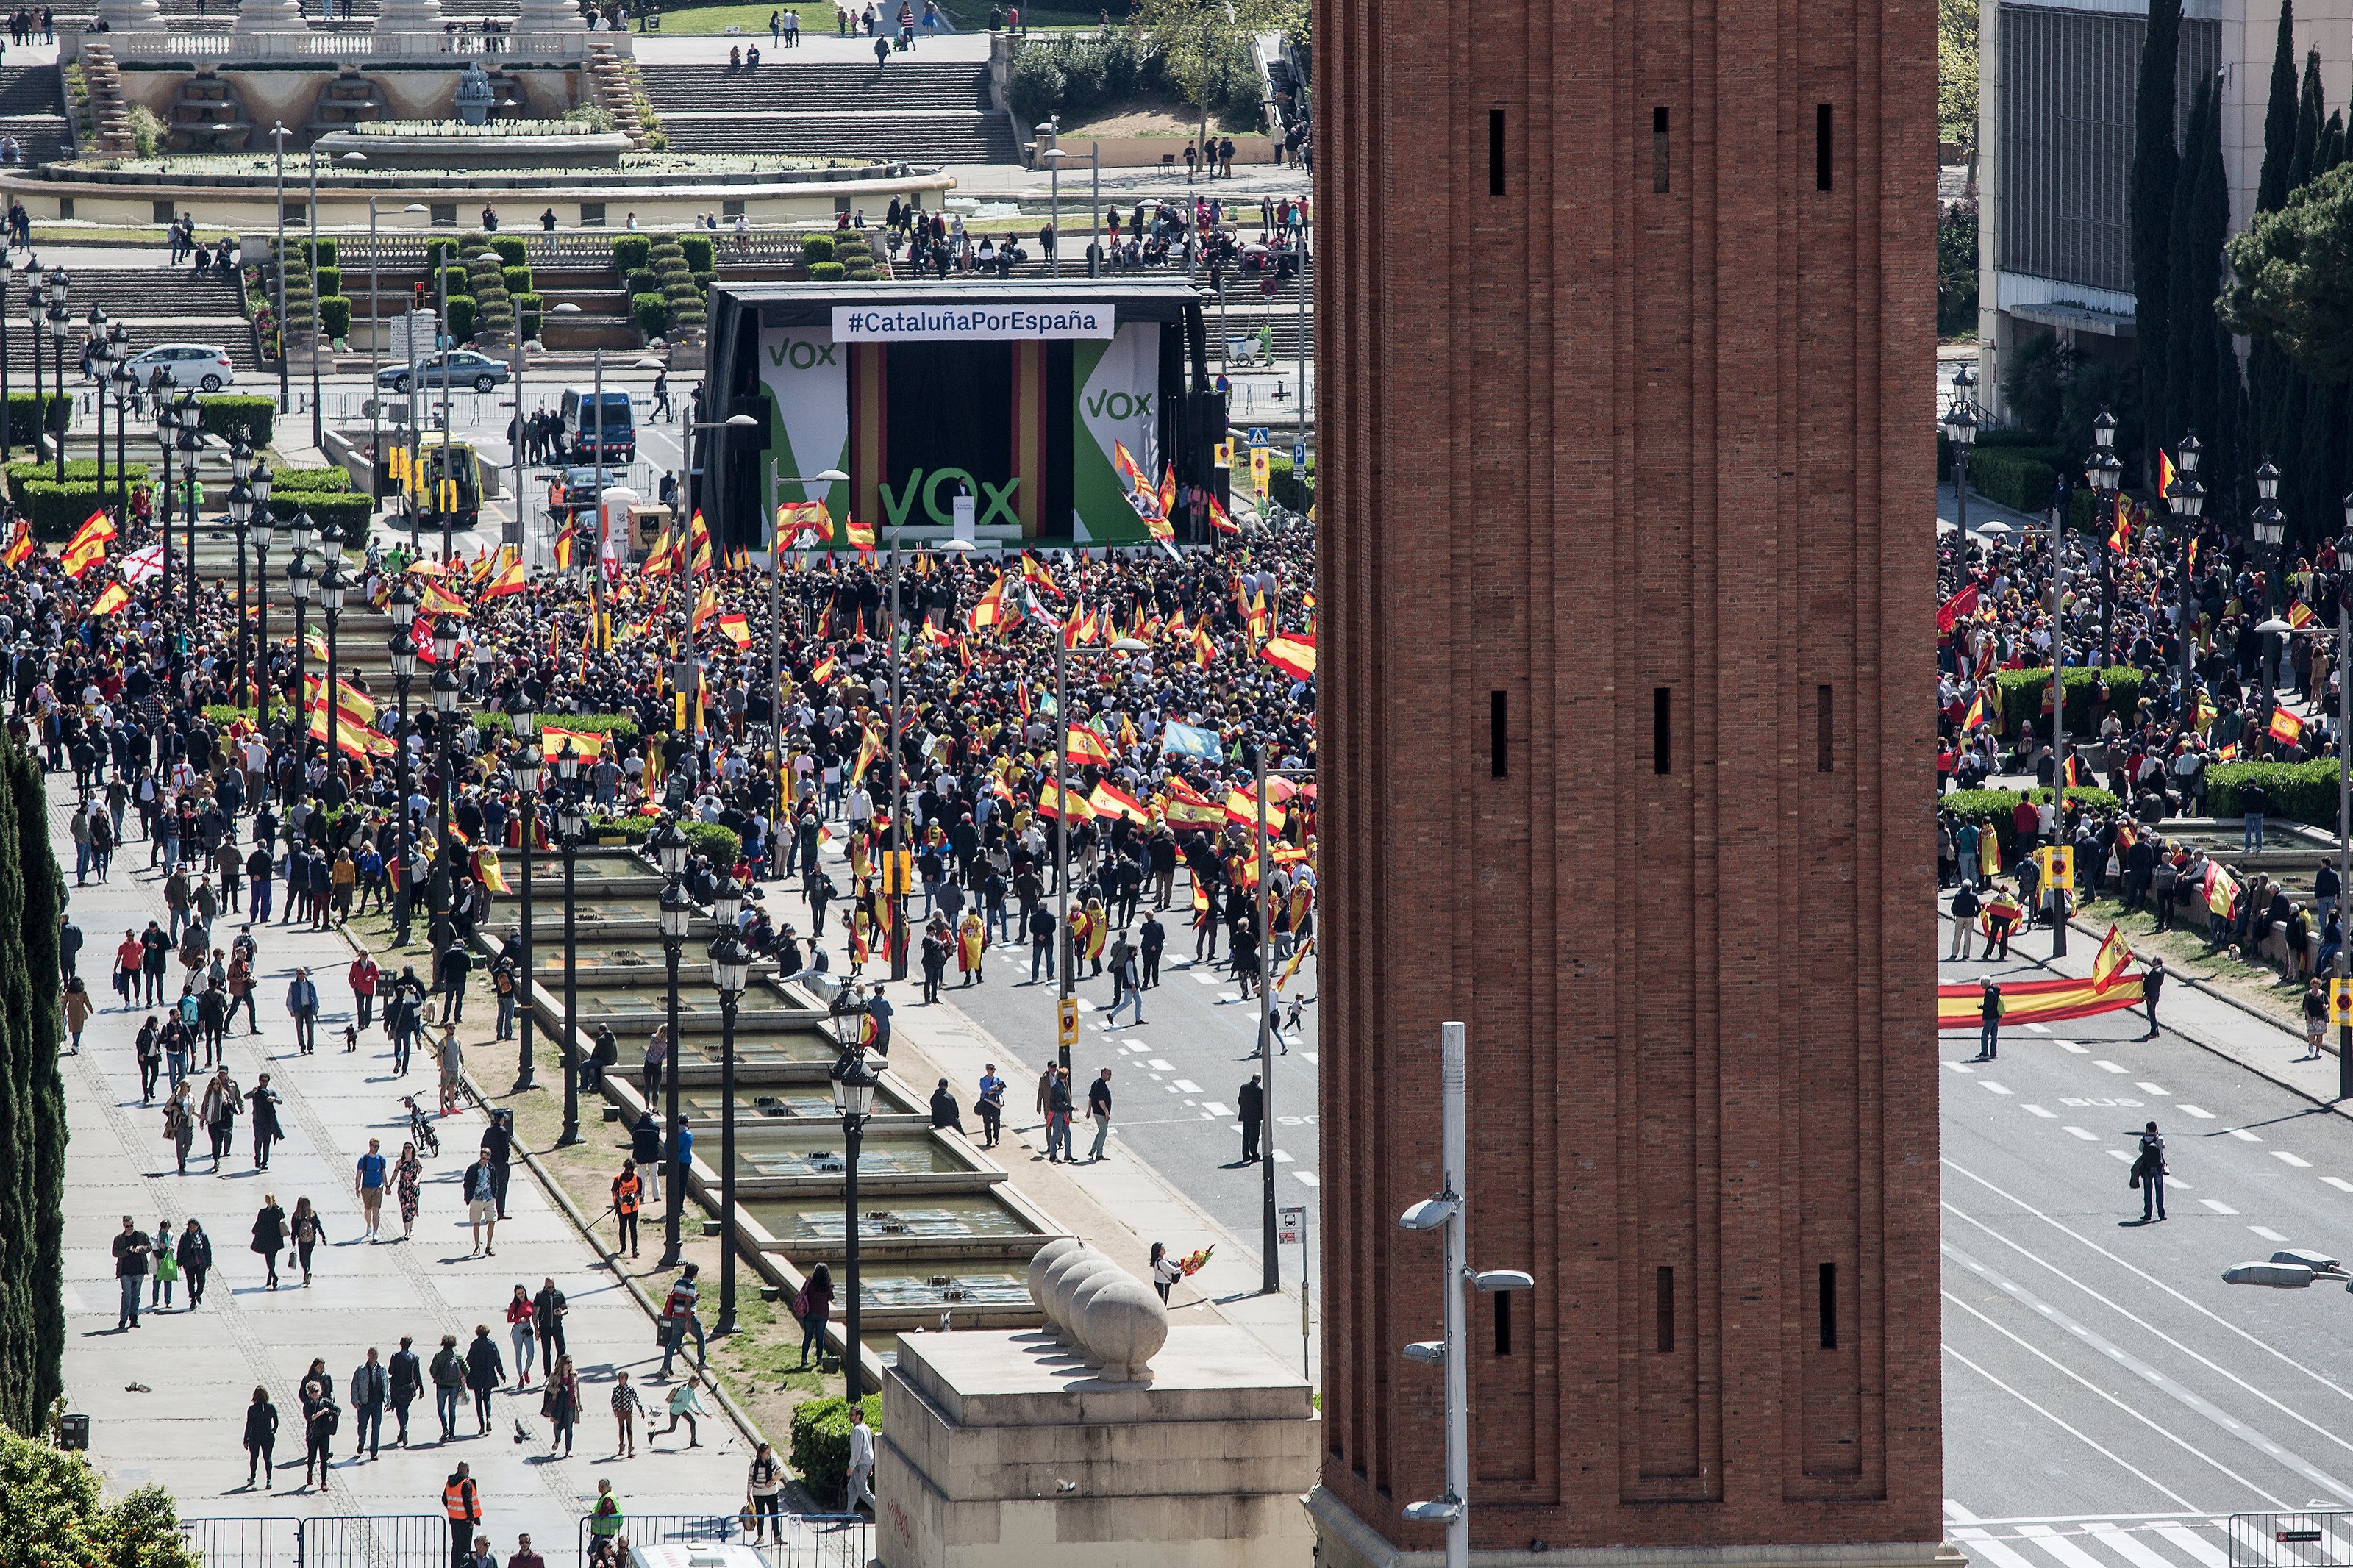 Vox rally in Barcelona: low turnout, high tension